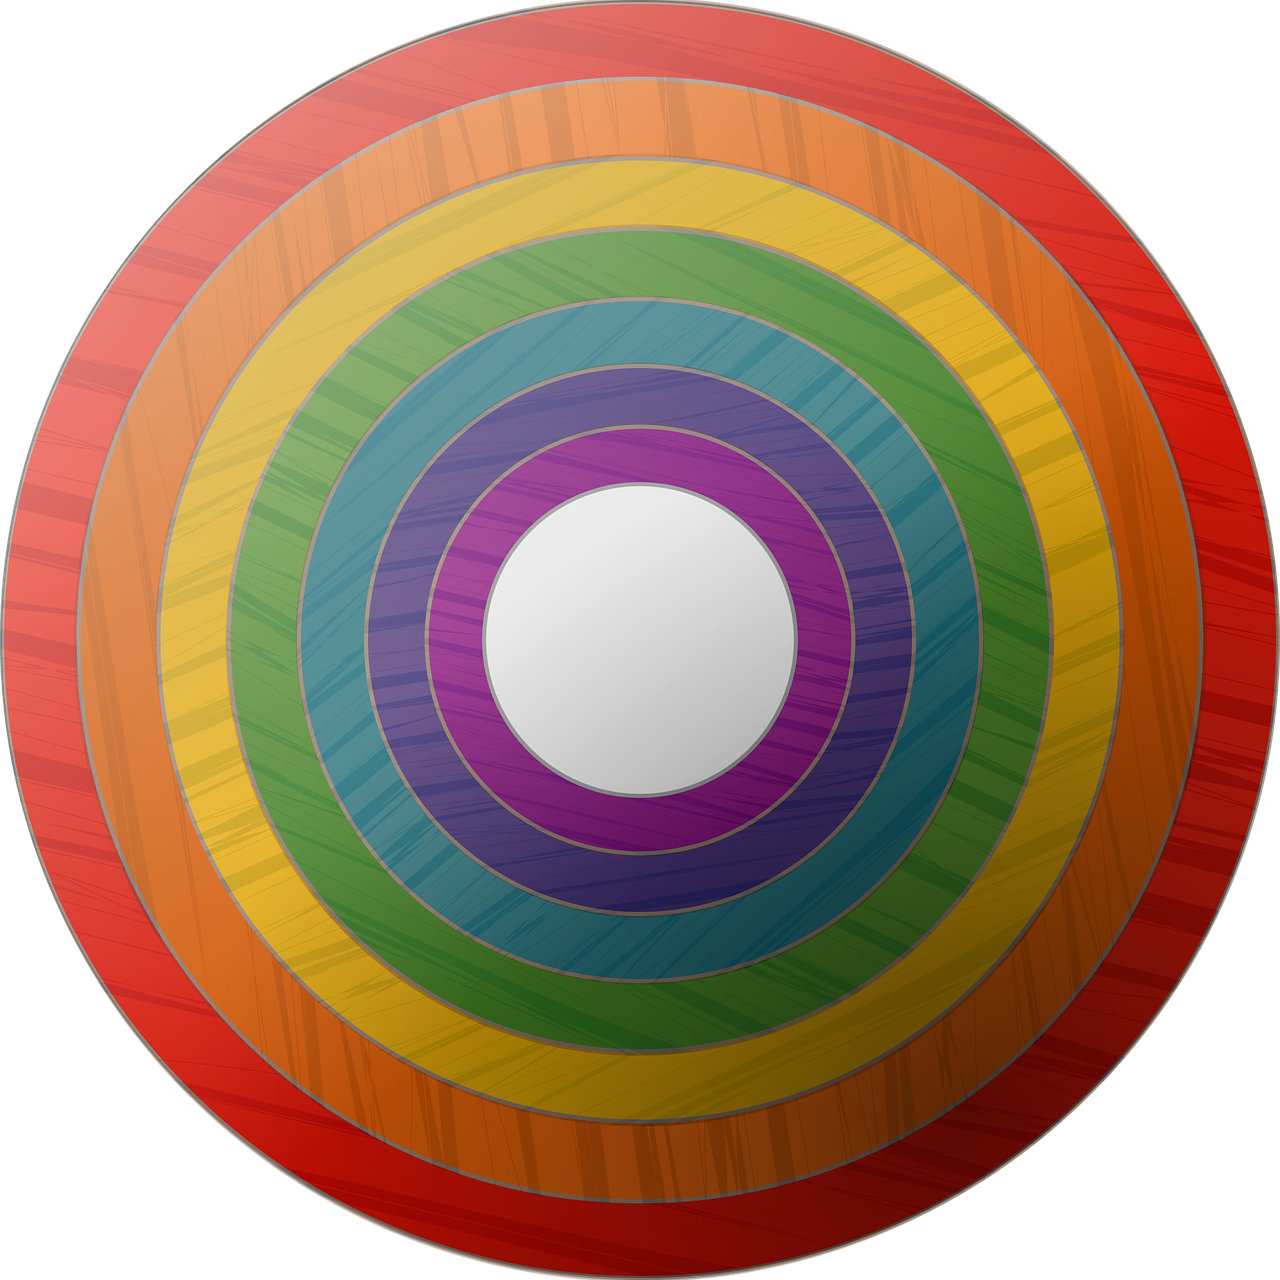 rainbow button symbol the lgbt flag colors free photo